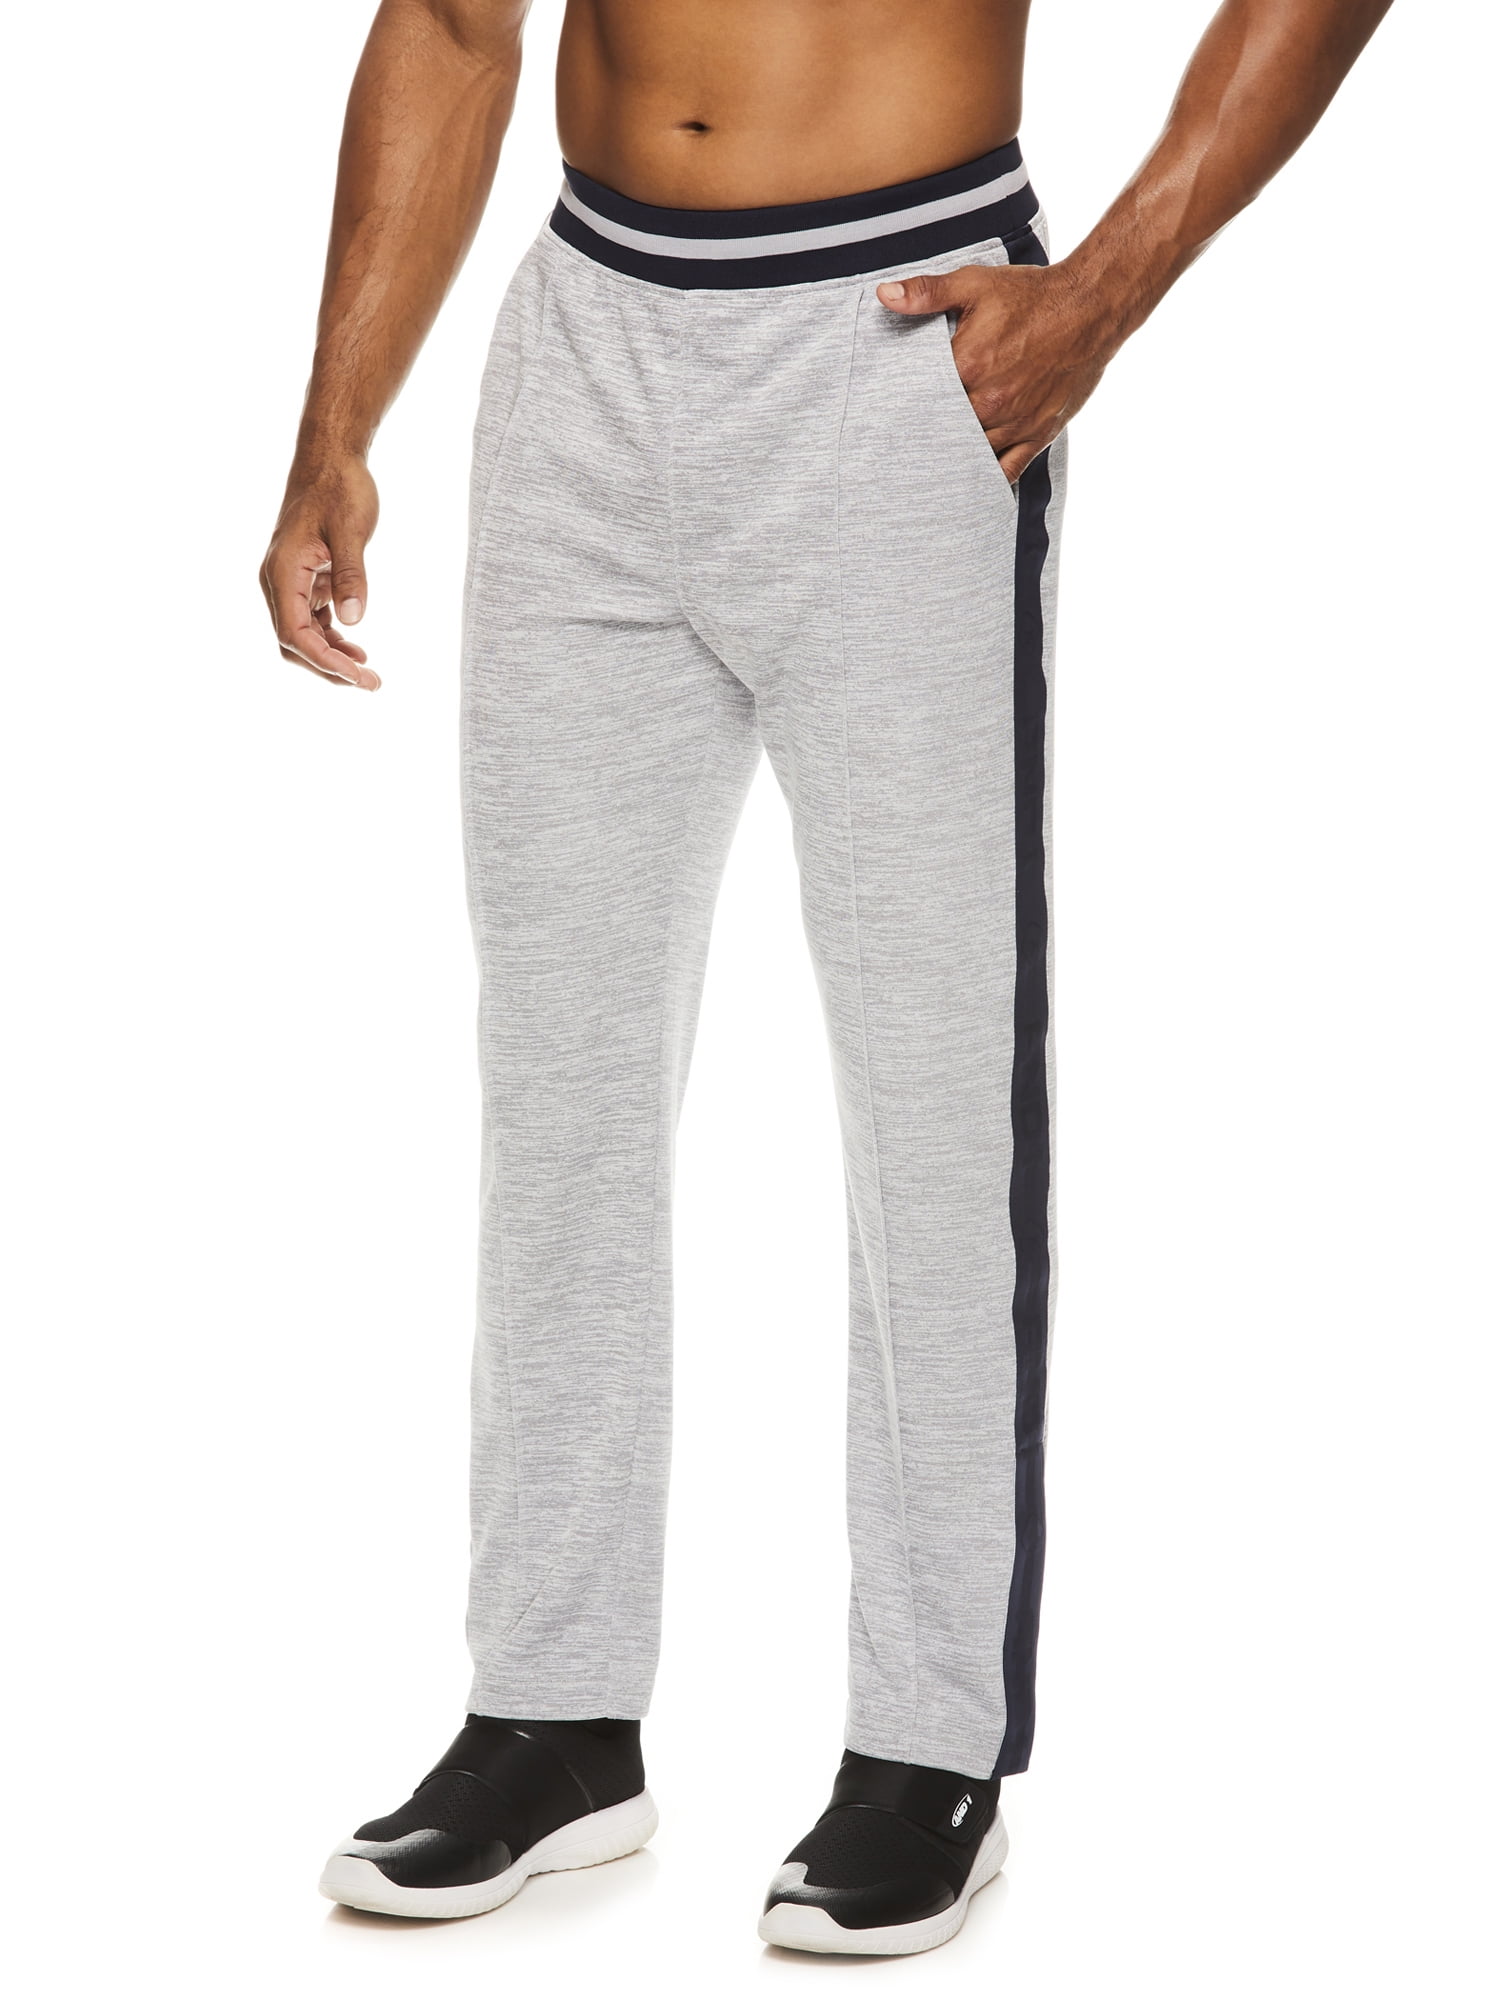 AND1 Men's and Big Men's Basketball Track Pant, up to 5XL - Walmart.com